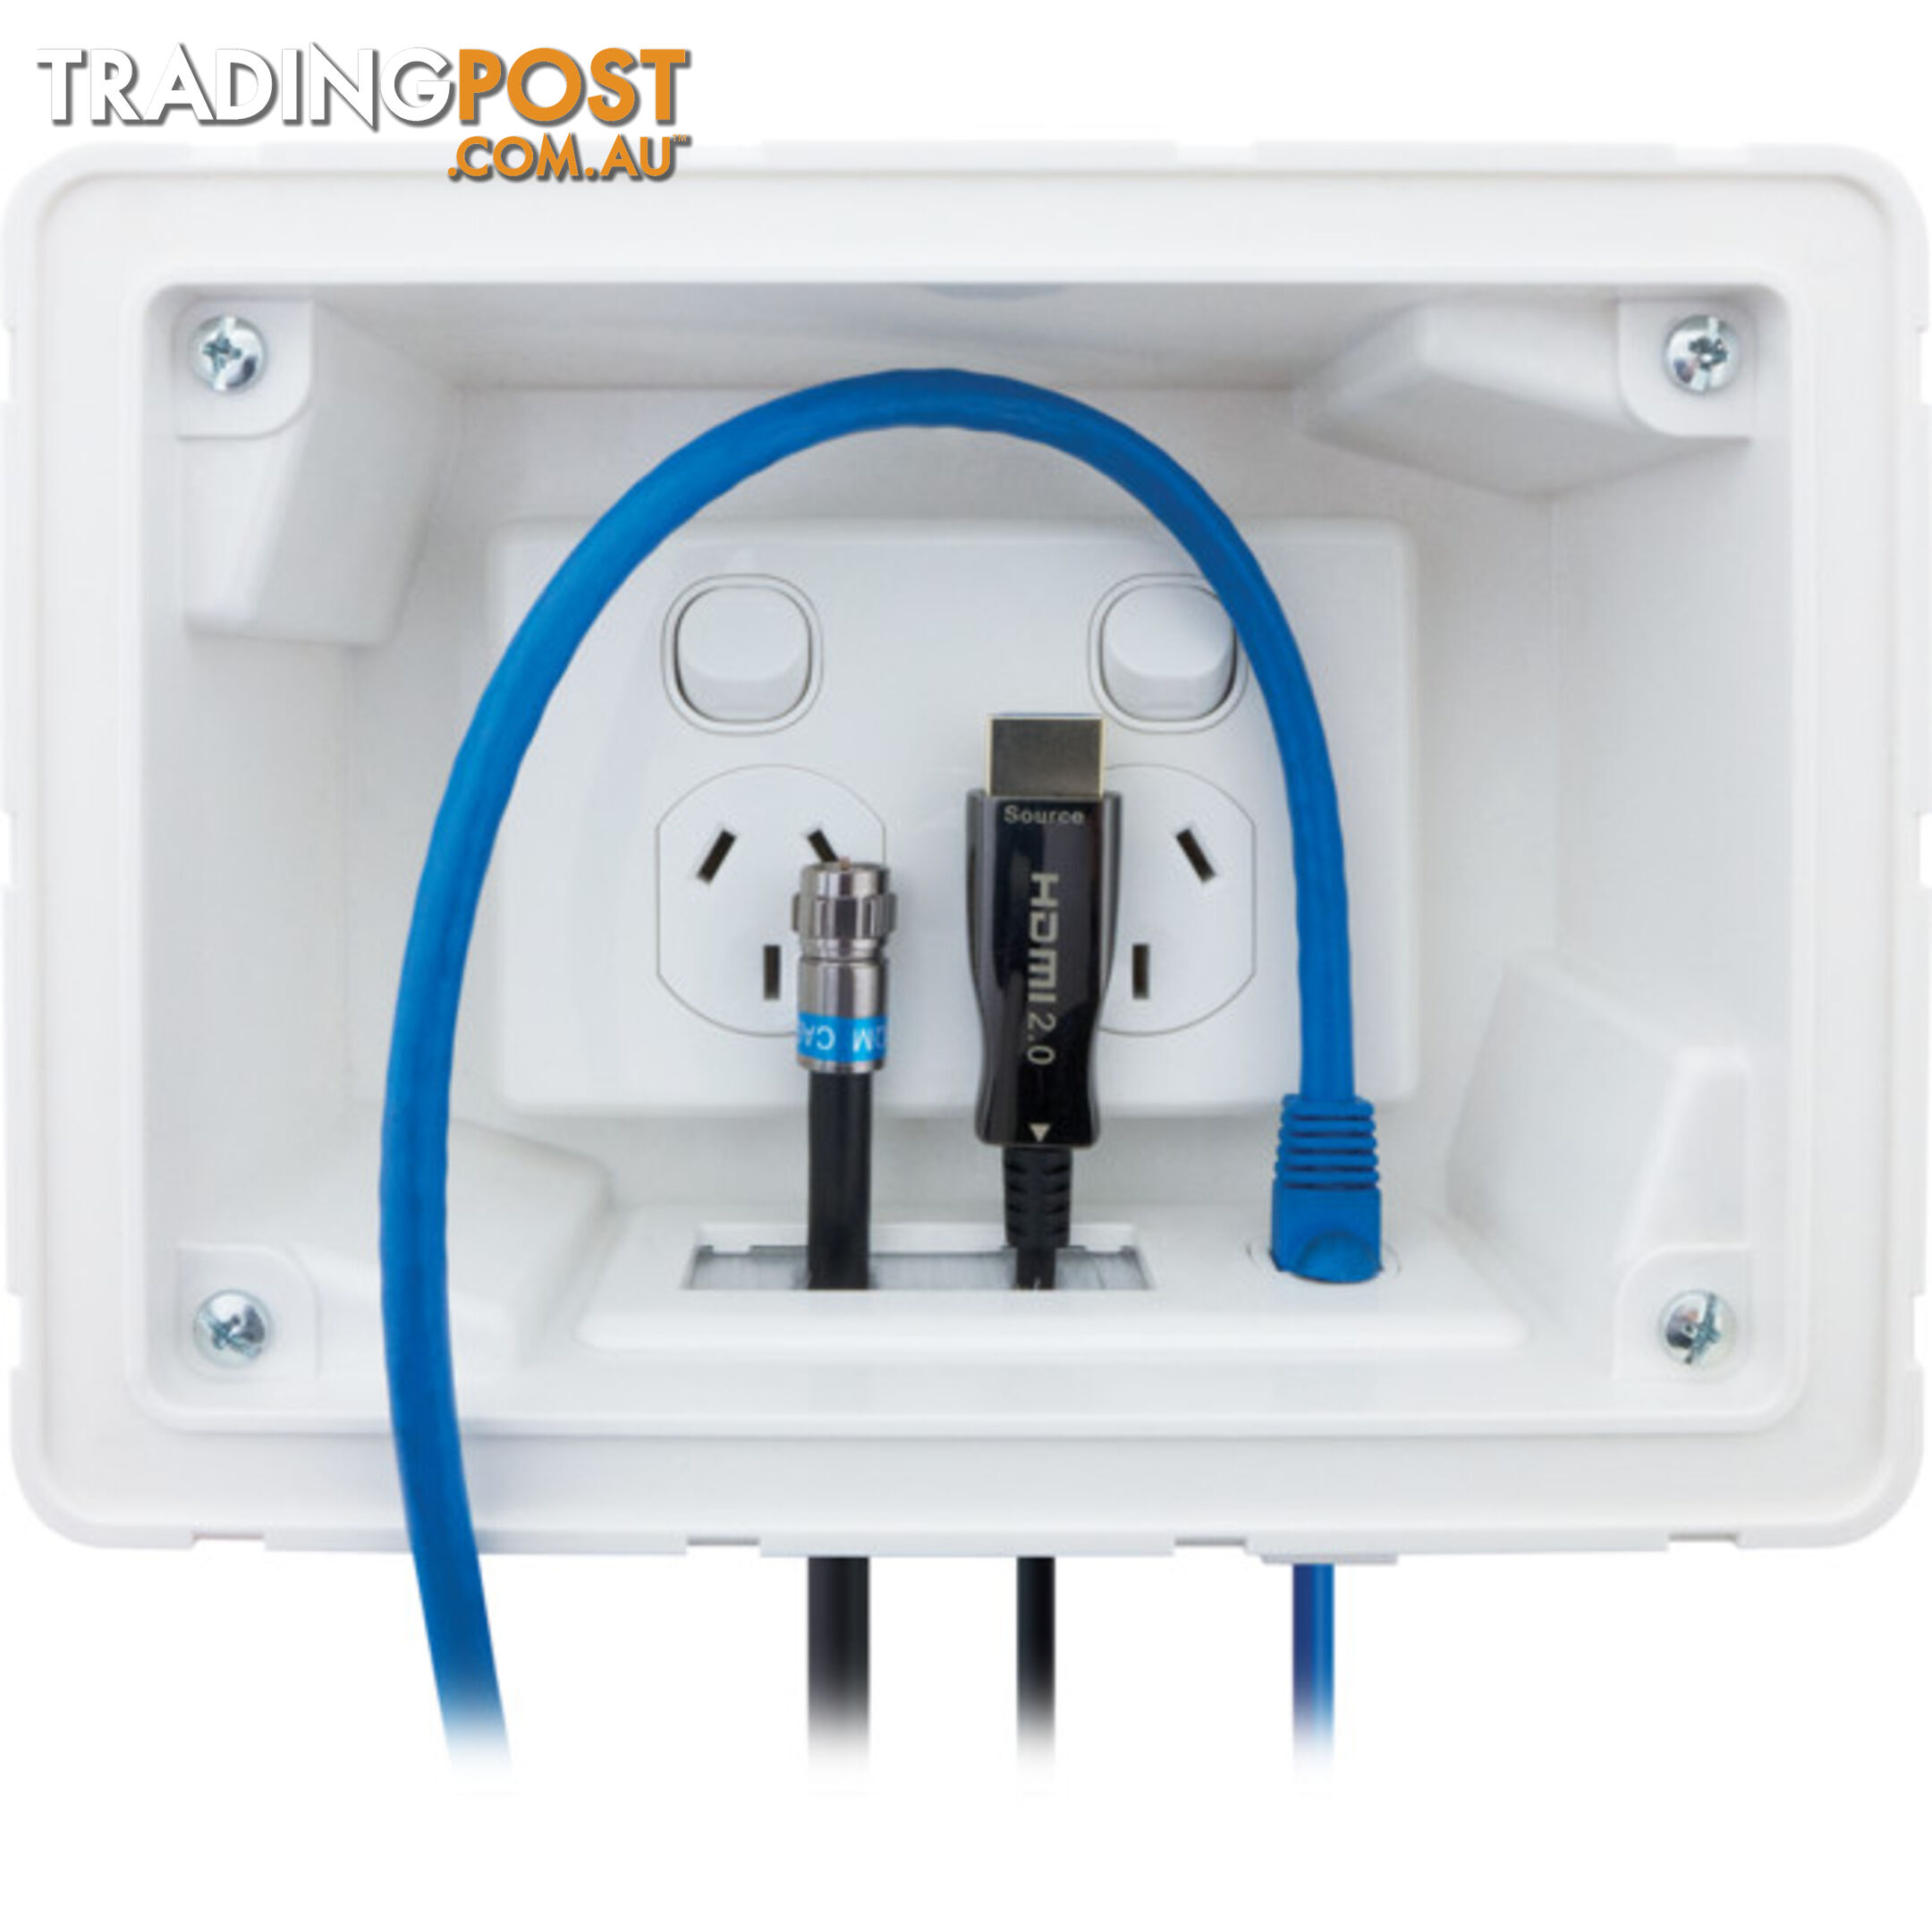 04MM-RP02 RECESSED WALL POINT WITH CABLE MANAGEMENT SYSTEM